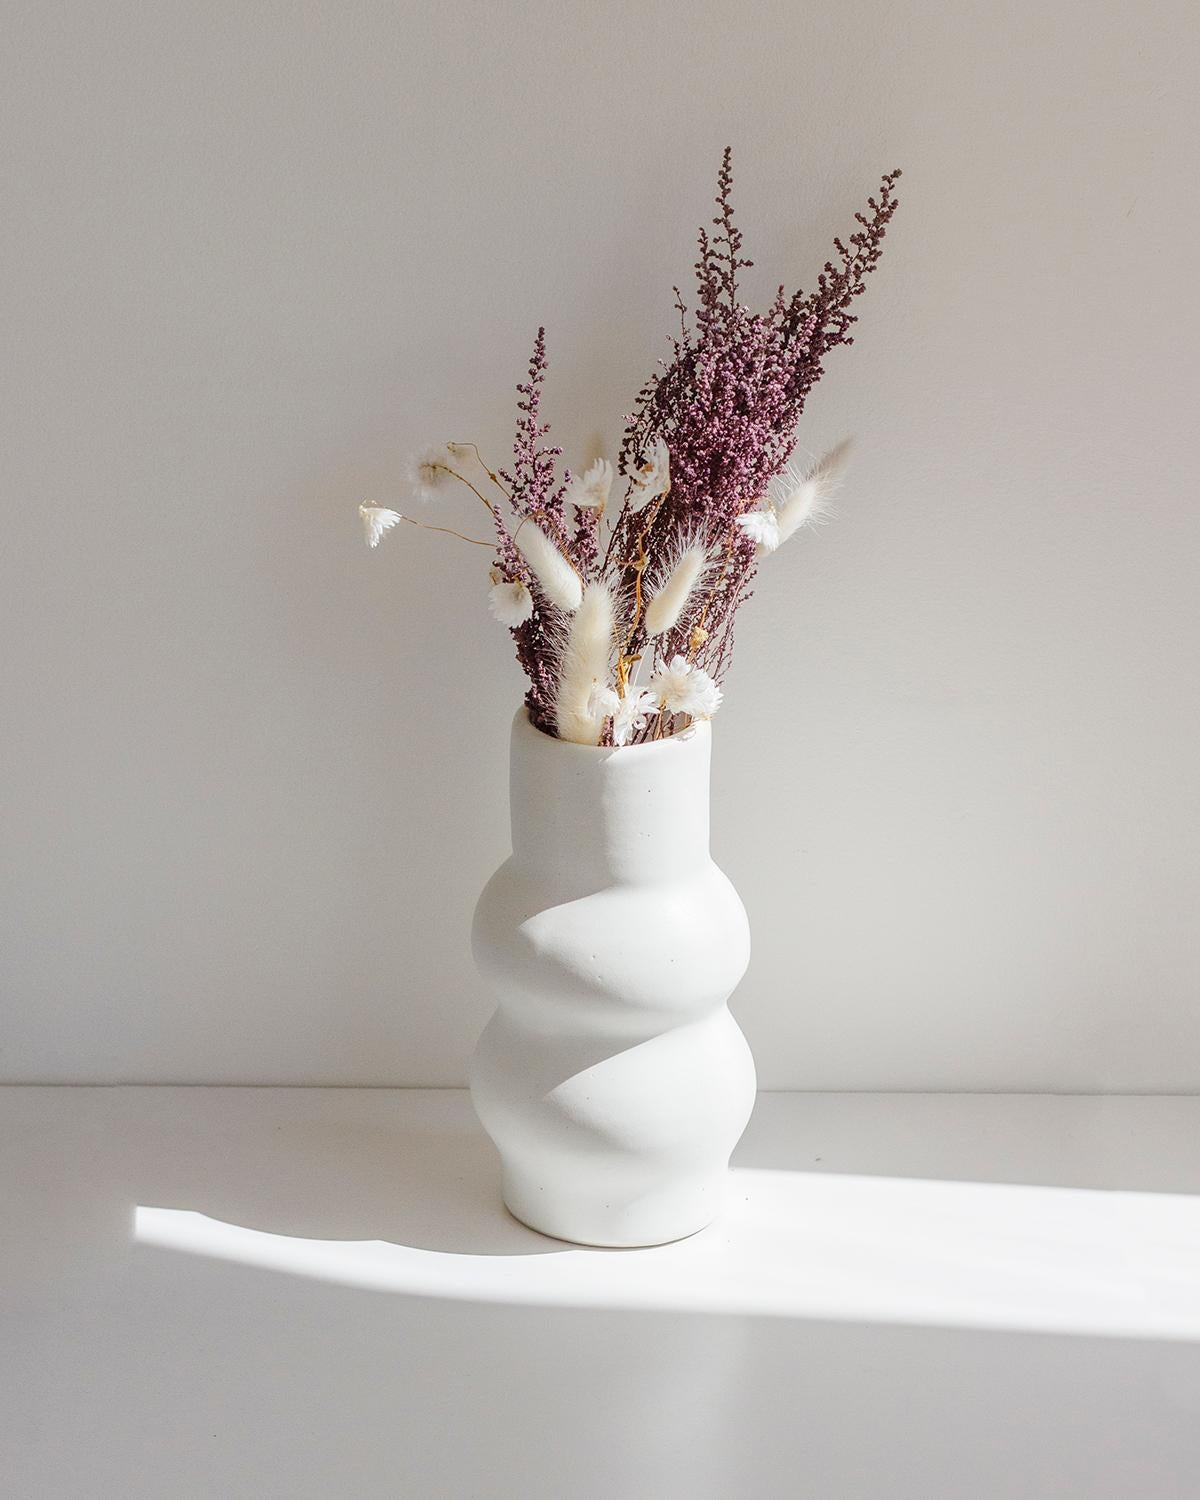 This uniquely beautiful clay vase was designed by Camila Apaez, and hand-made by her women-lead artisan studio in Guadalajara, Mexico.

This design is also available in brown.

Only one of each design and color available. Each one of these vases